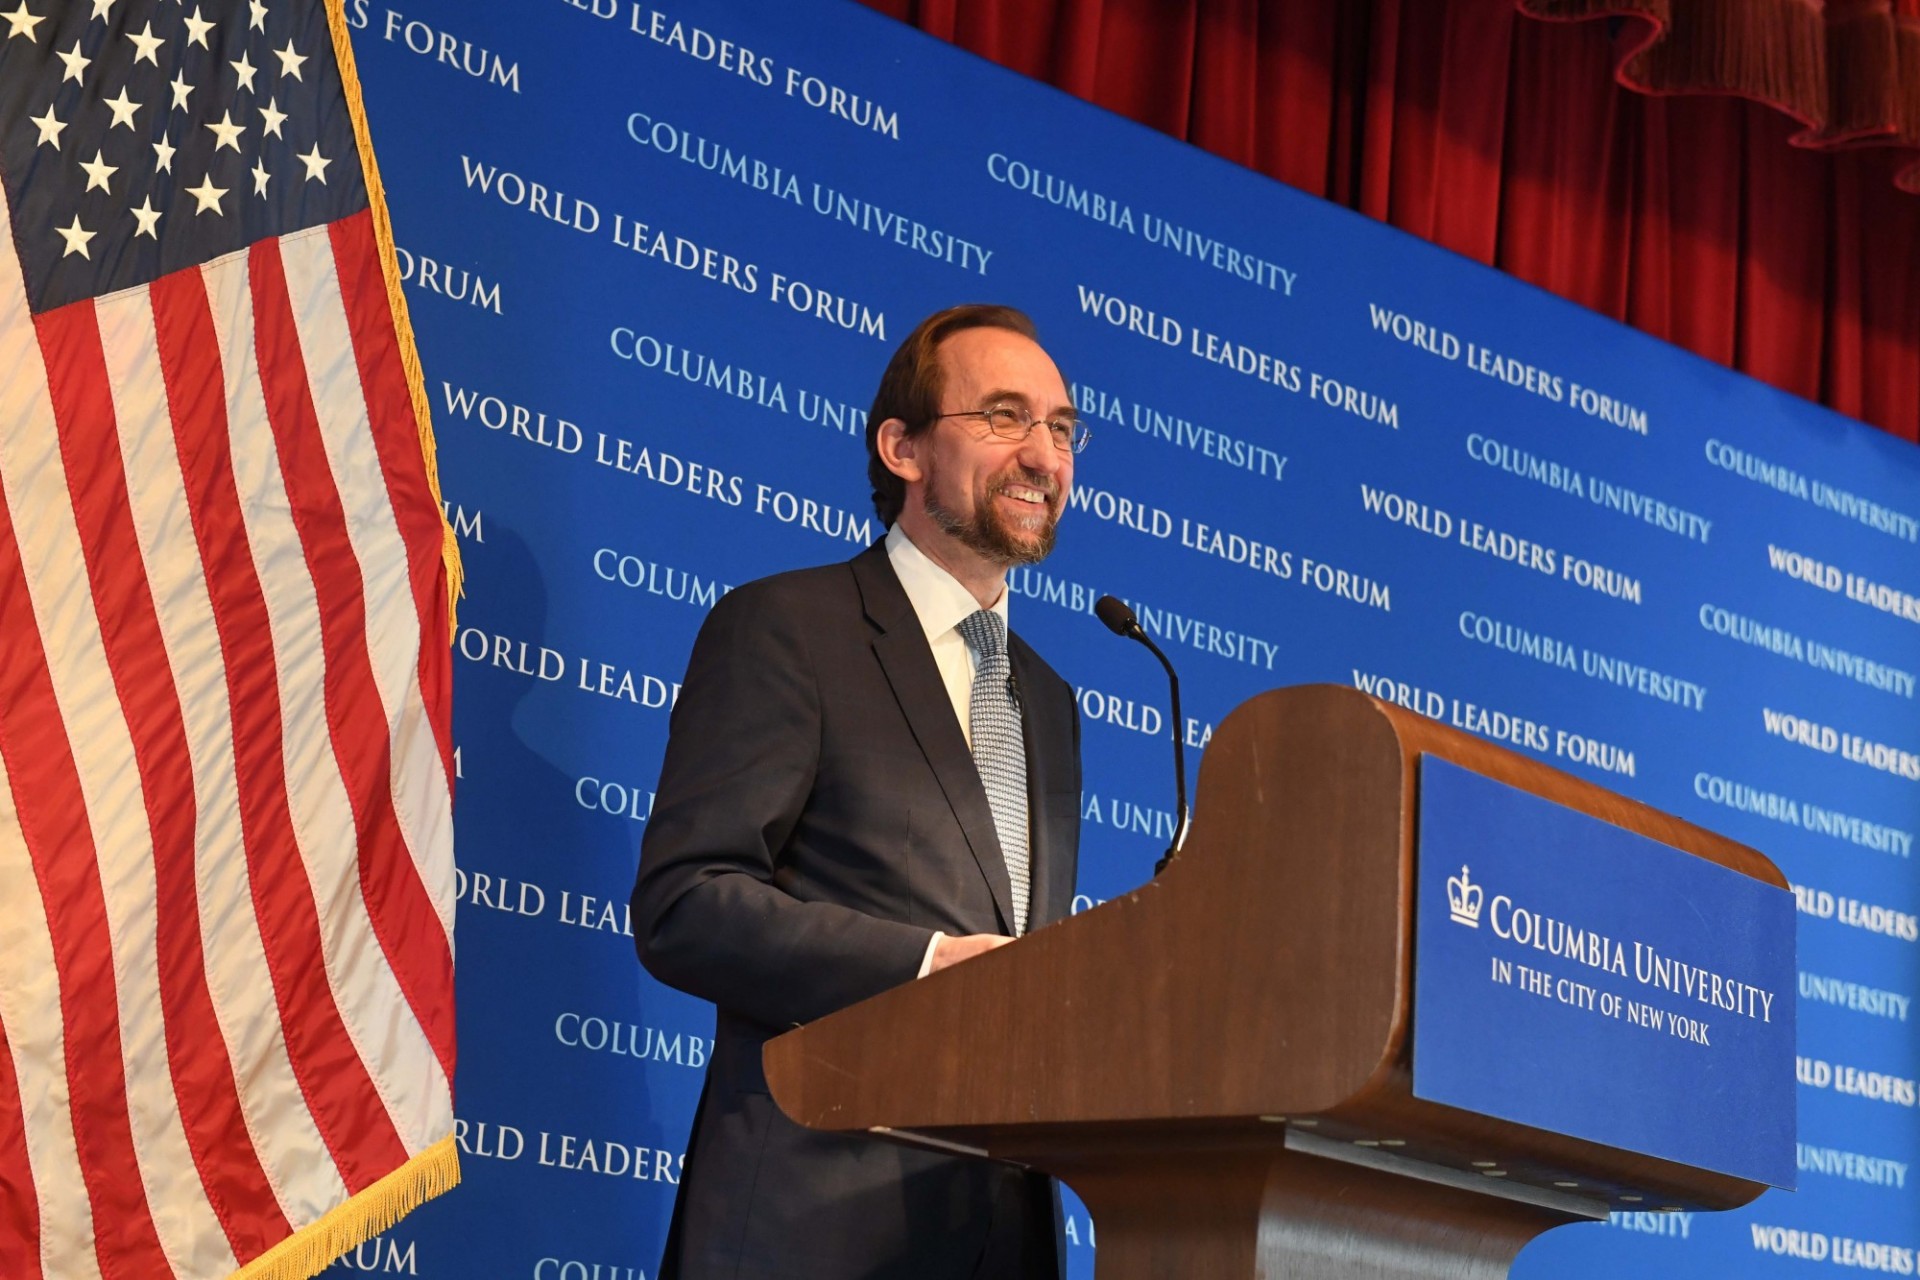  Mr. Zeid Ra'ad Al Hussein, United Nations High Commissioner for Human Rights, delivers his address, “The State of Human Rights in the World Today,” to Columbia University students, faculty and staff.